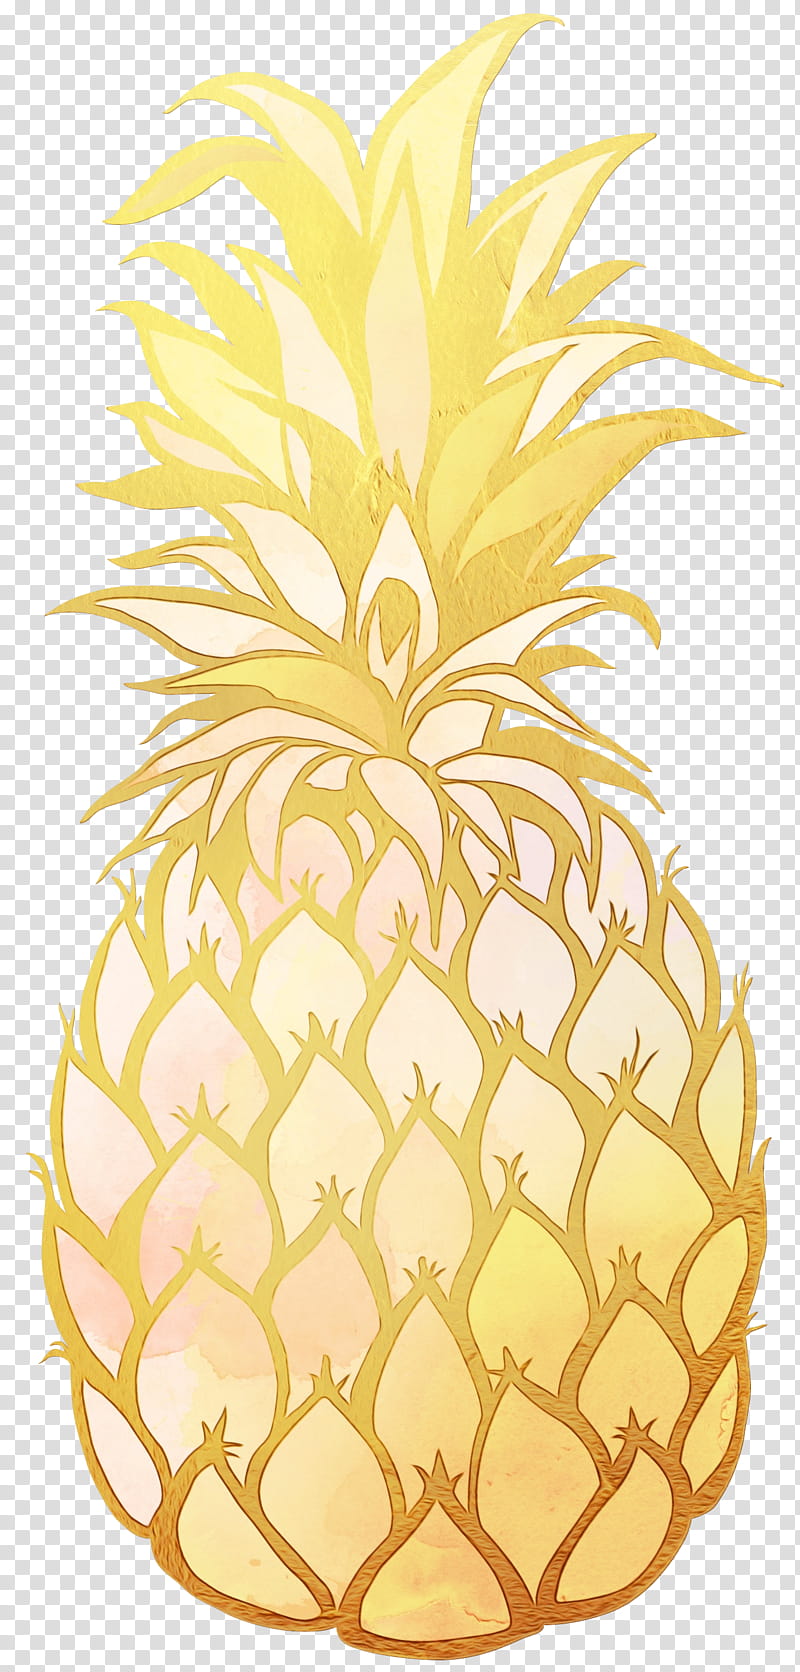 Watercolor Plant, Pineapple, Printing, Zazzle, Poster, Canvas Print, Wall, Luau transparent background PNG clipart